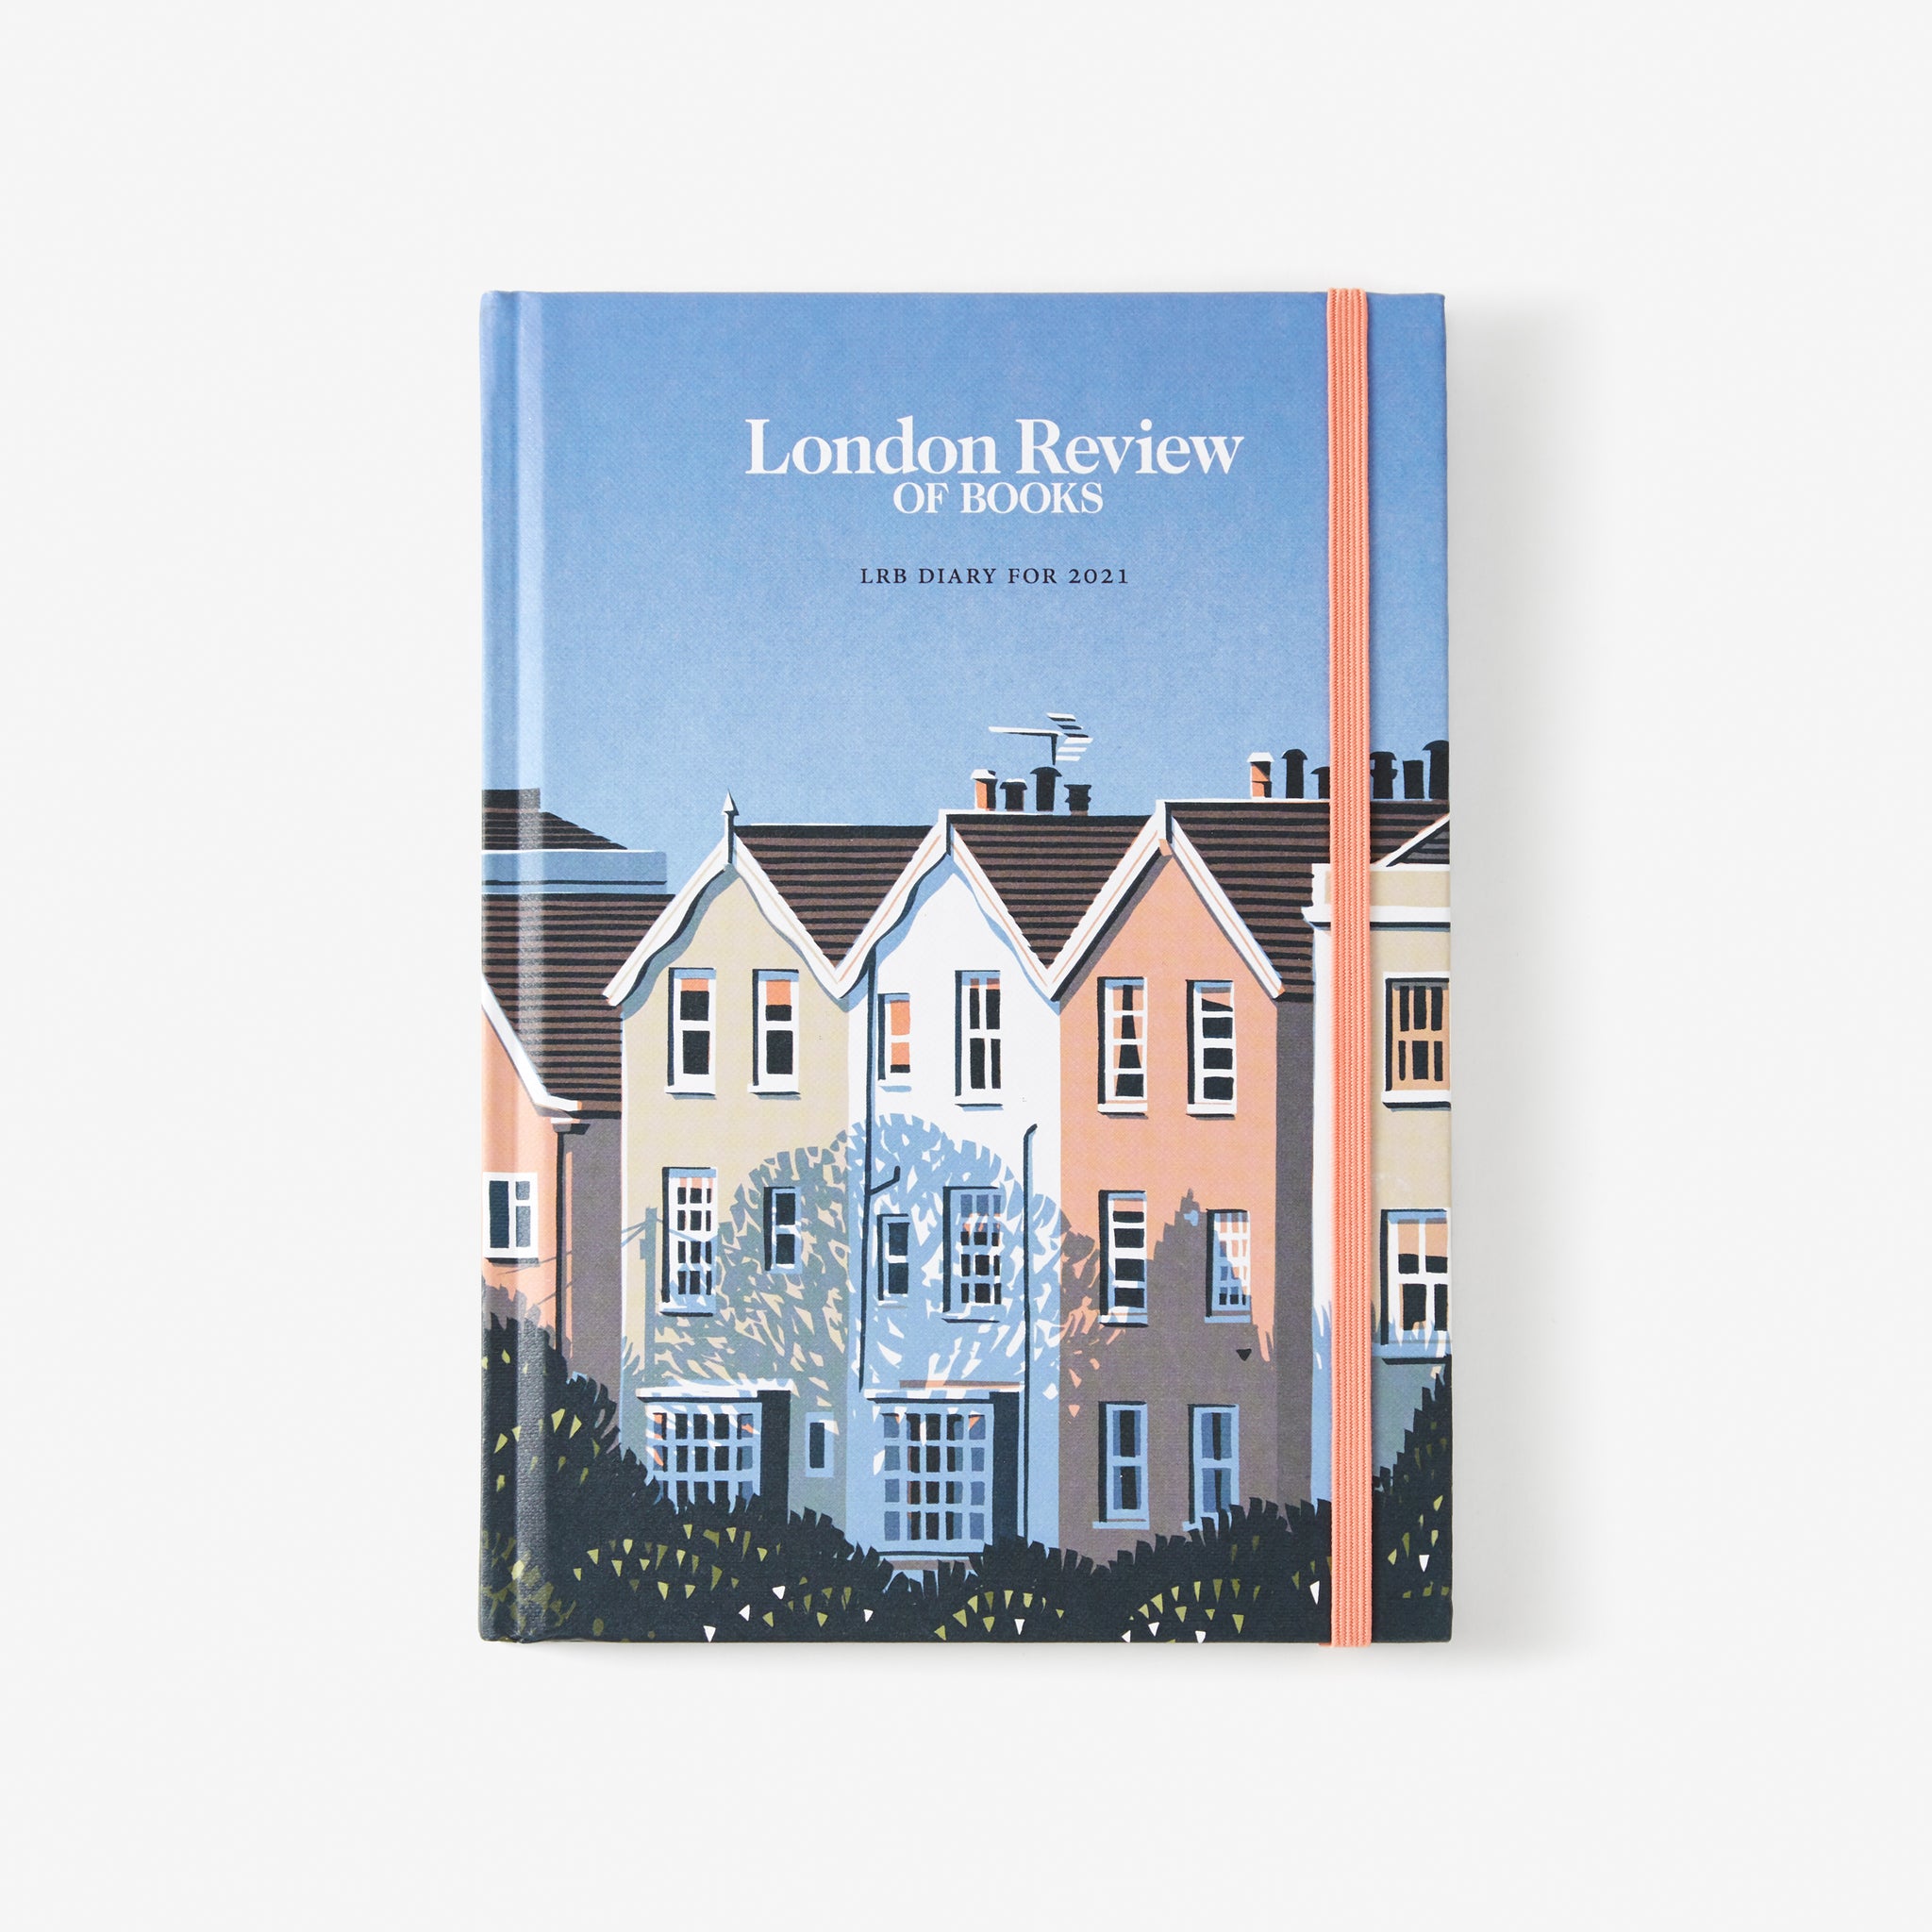 london stories book review